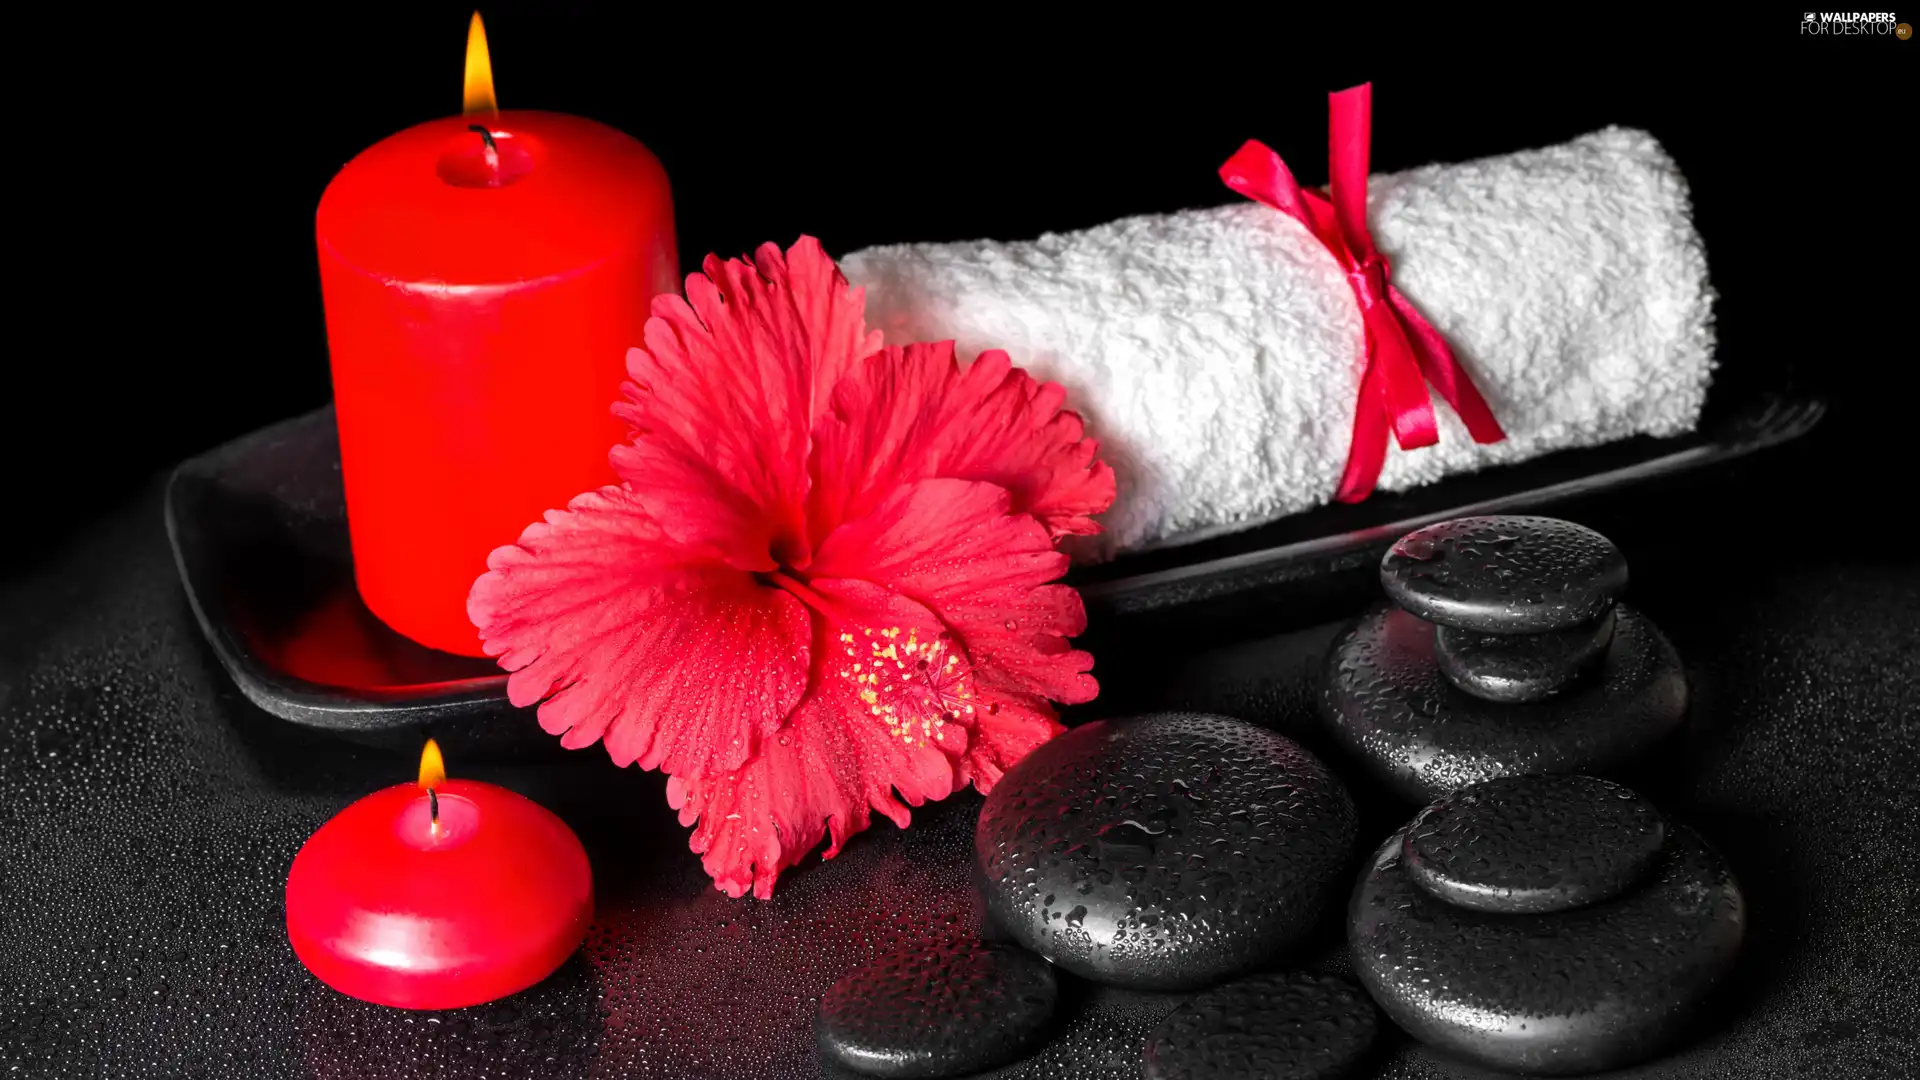 Candles, Stones, tray, Towel, hibiskus, Red, Spa, Colourfull Flowers